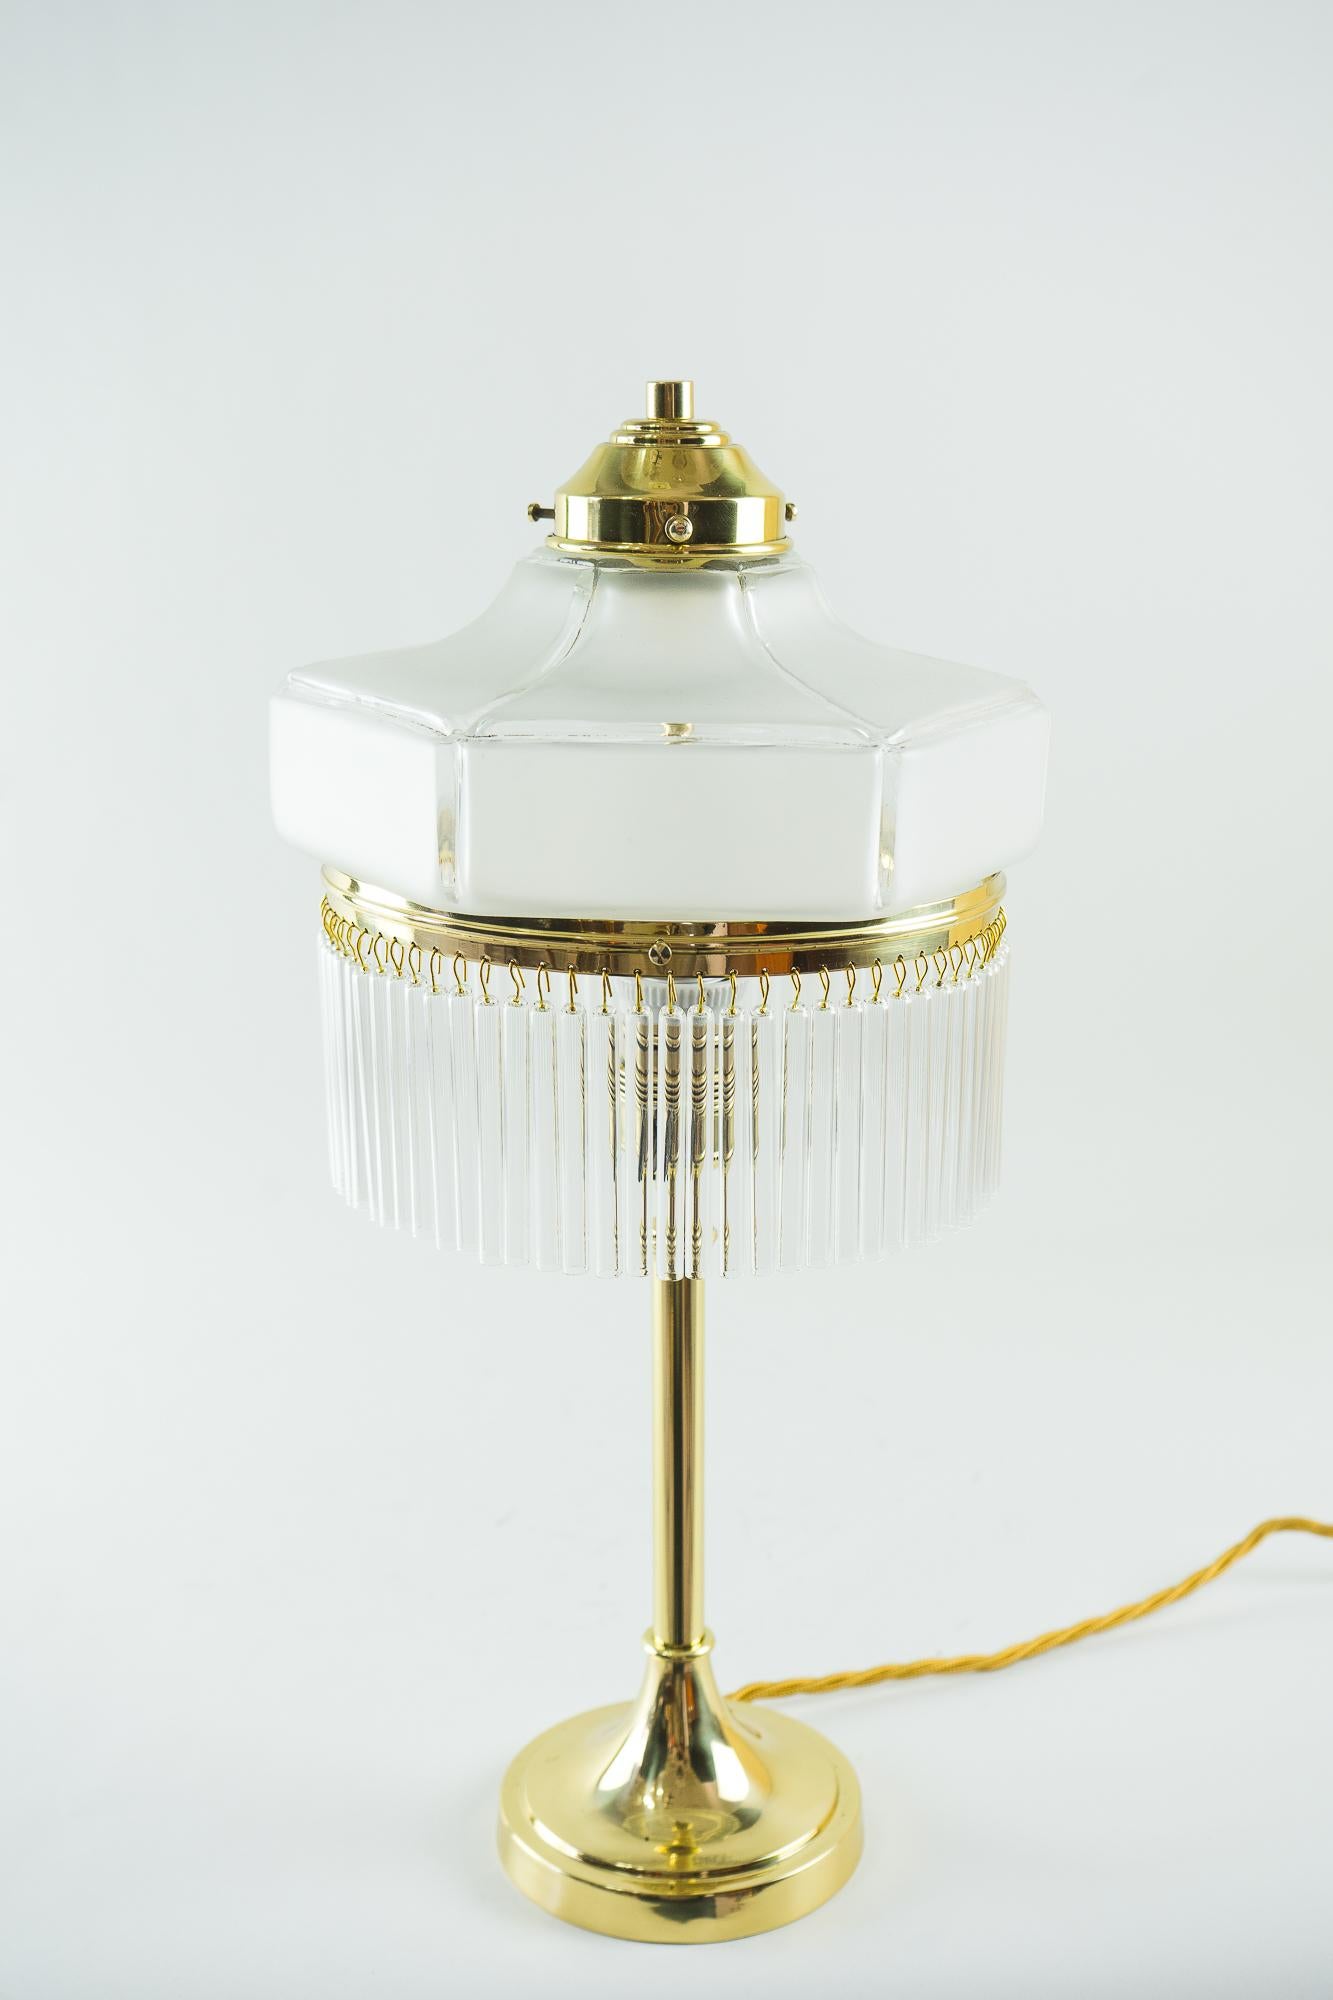 Art Deco Table Lamp, Vienna, 1920s (Messing)